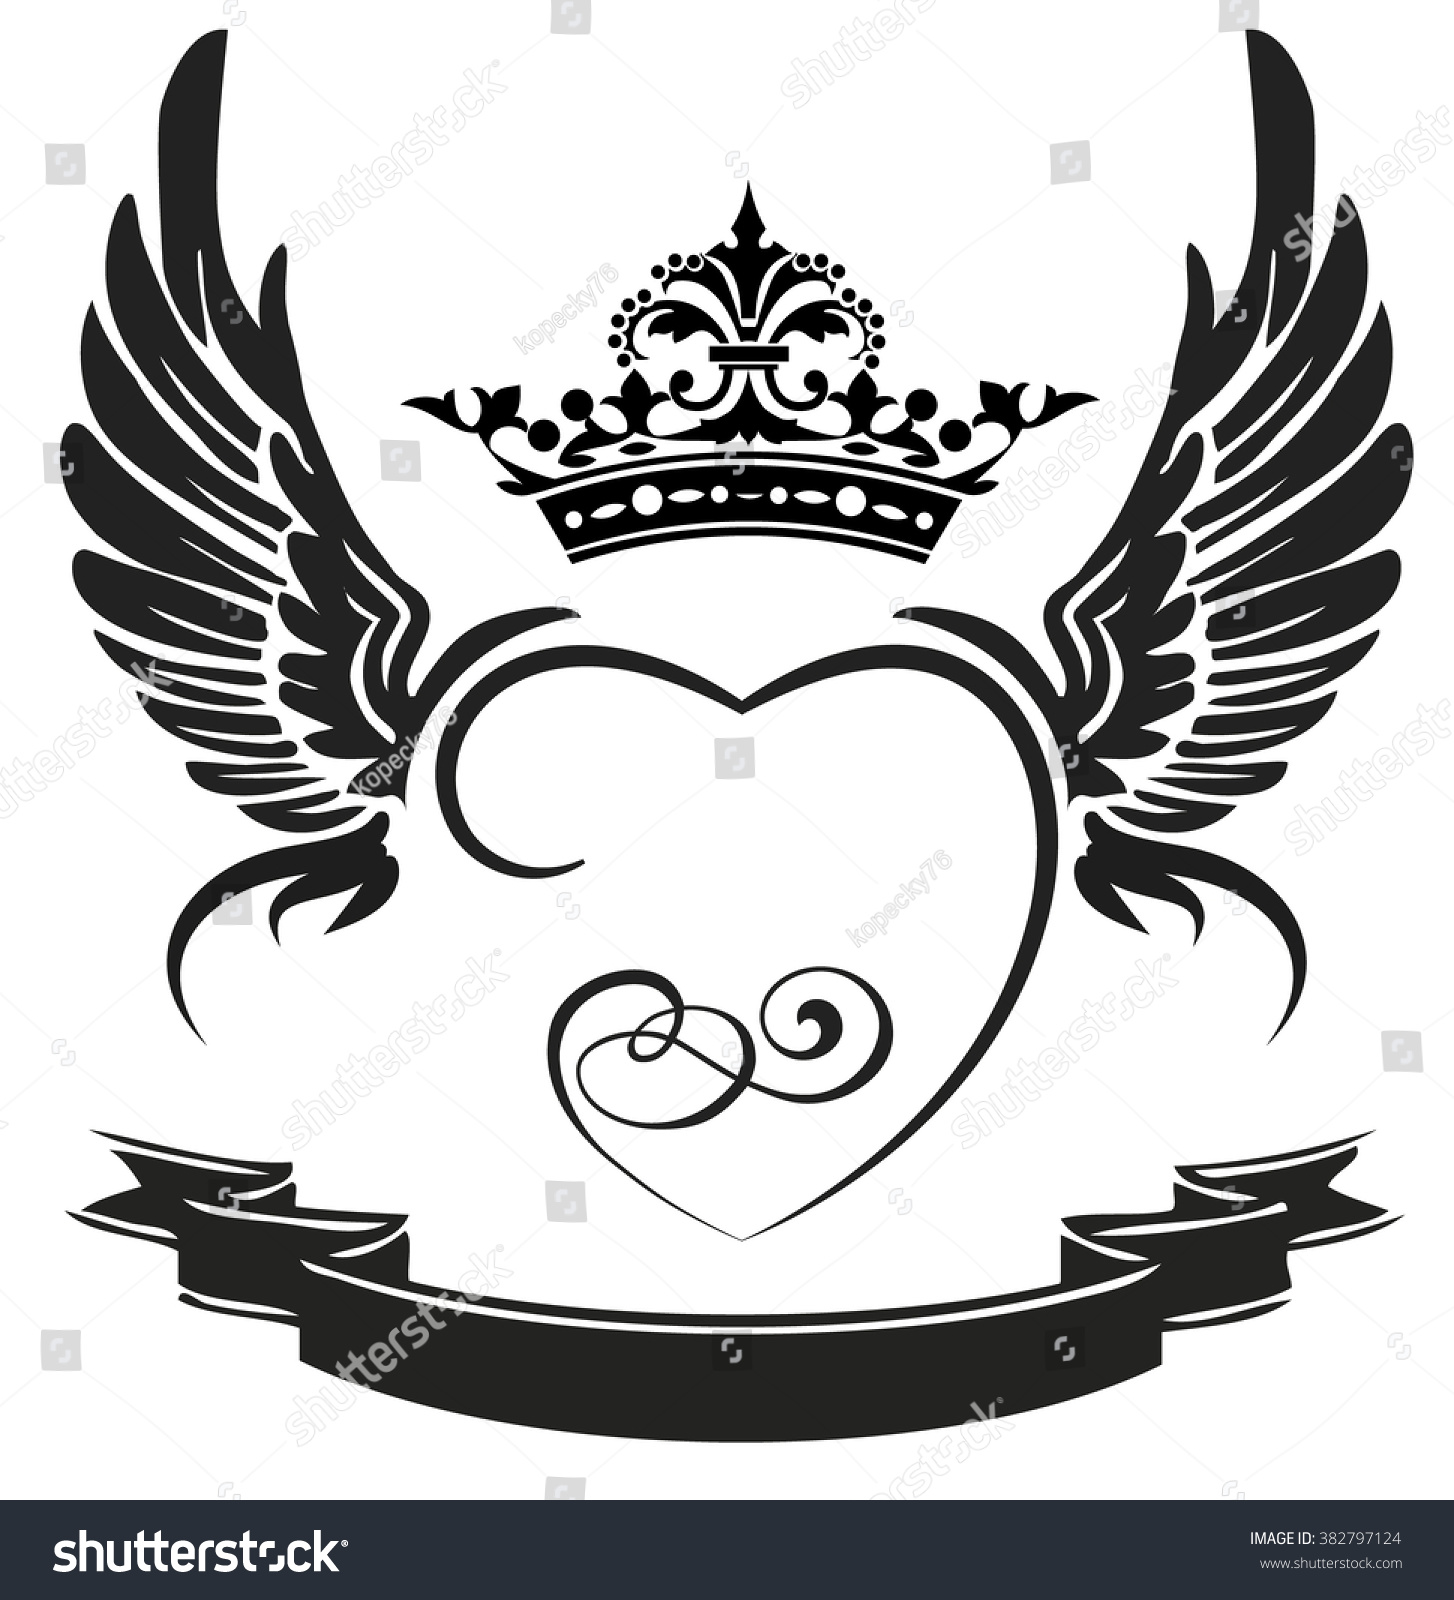 Black Wings Ribbon Heart Crown Isolated Stock Vector ...